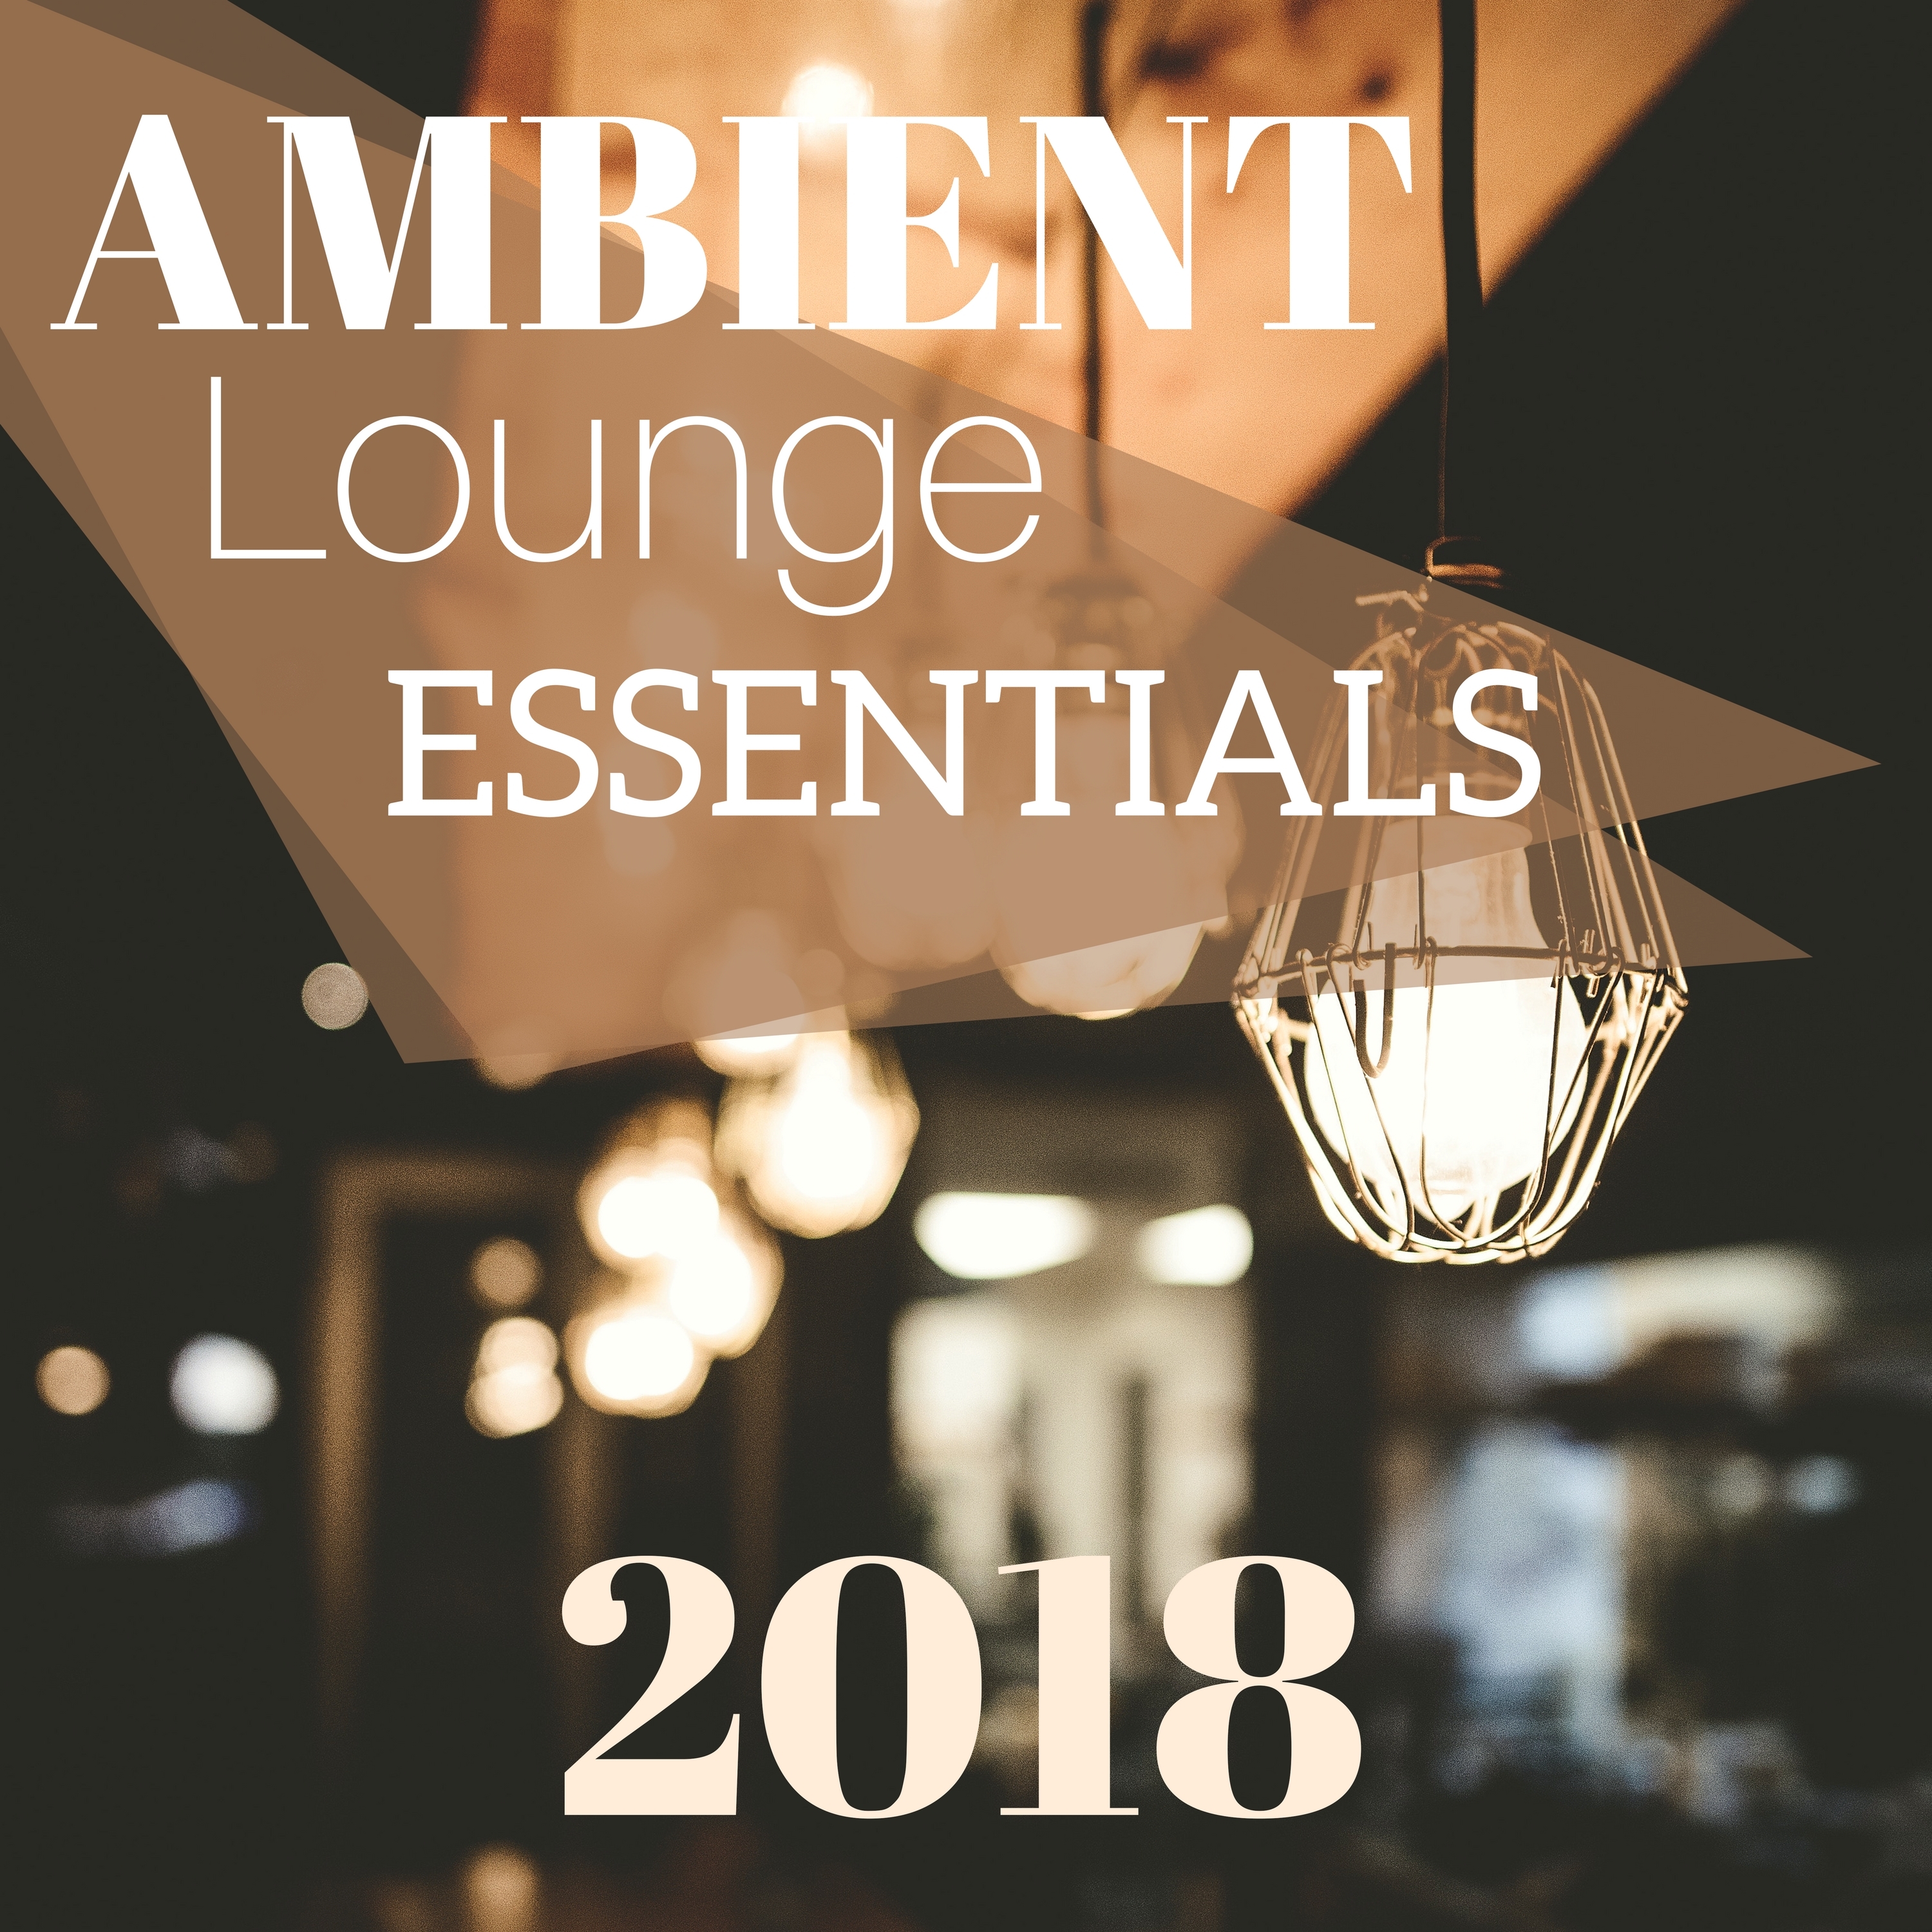 Ambient Lounge Essentials 2018 - New Year Cool Background Music Collection for Bar & Winehouse